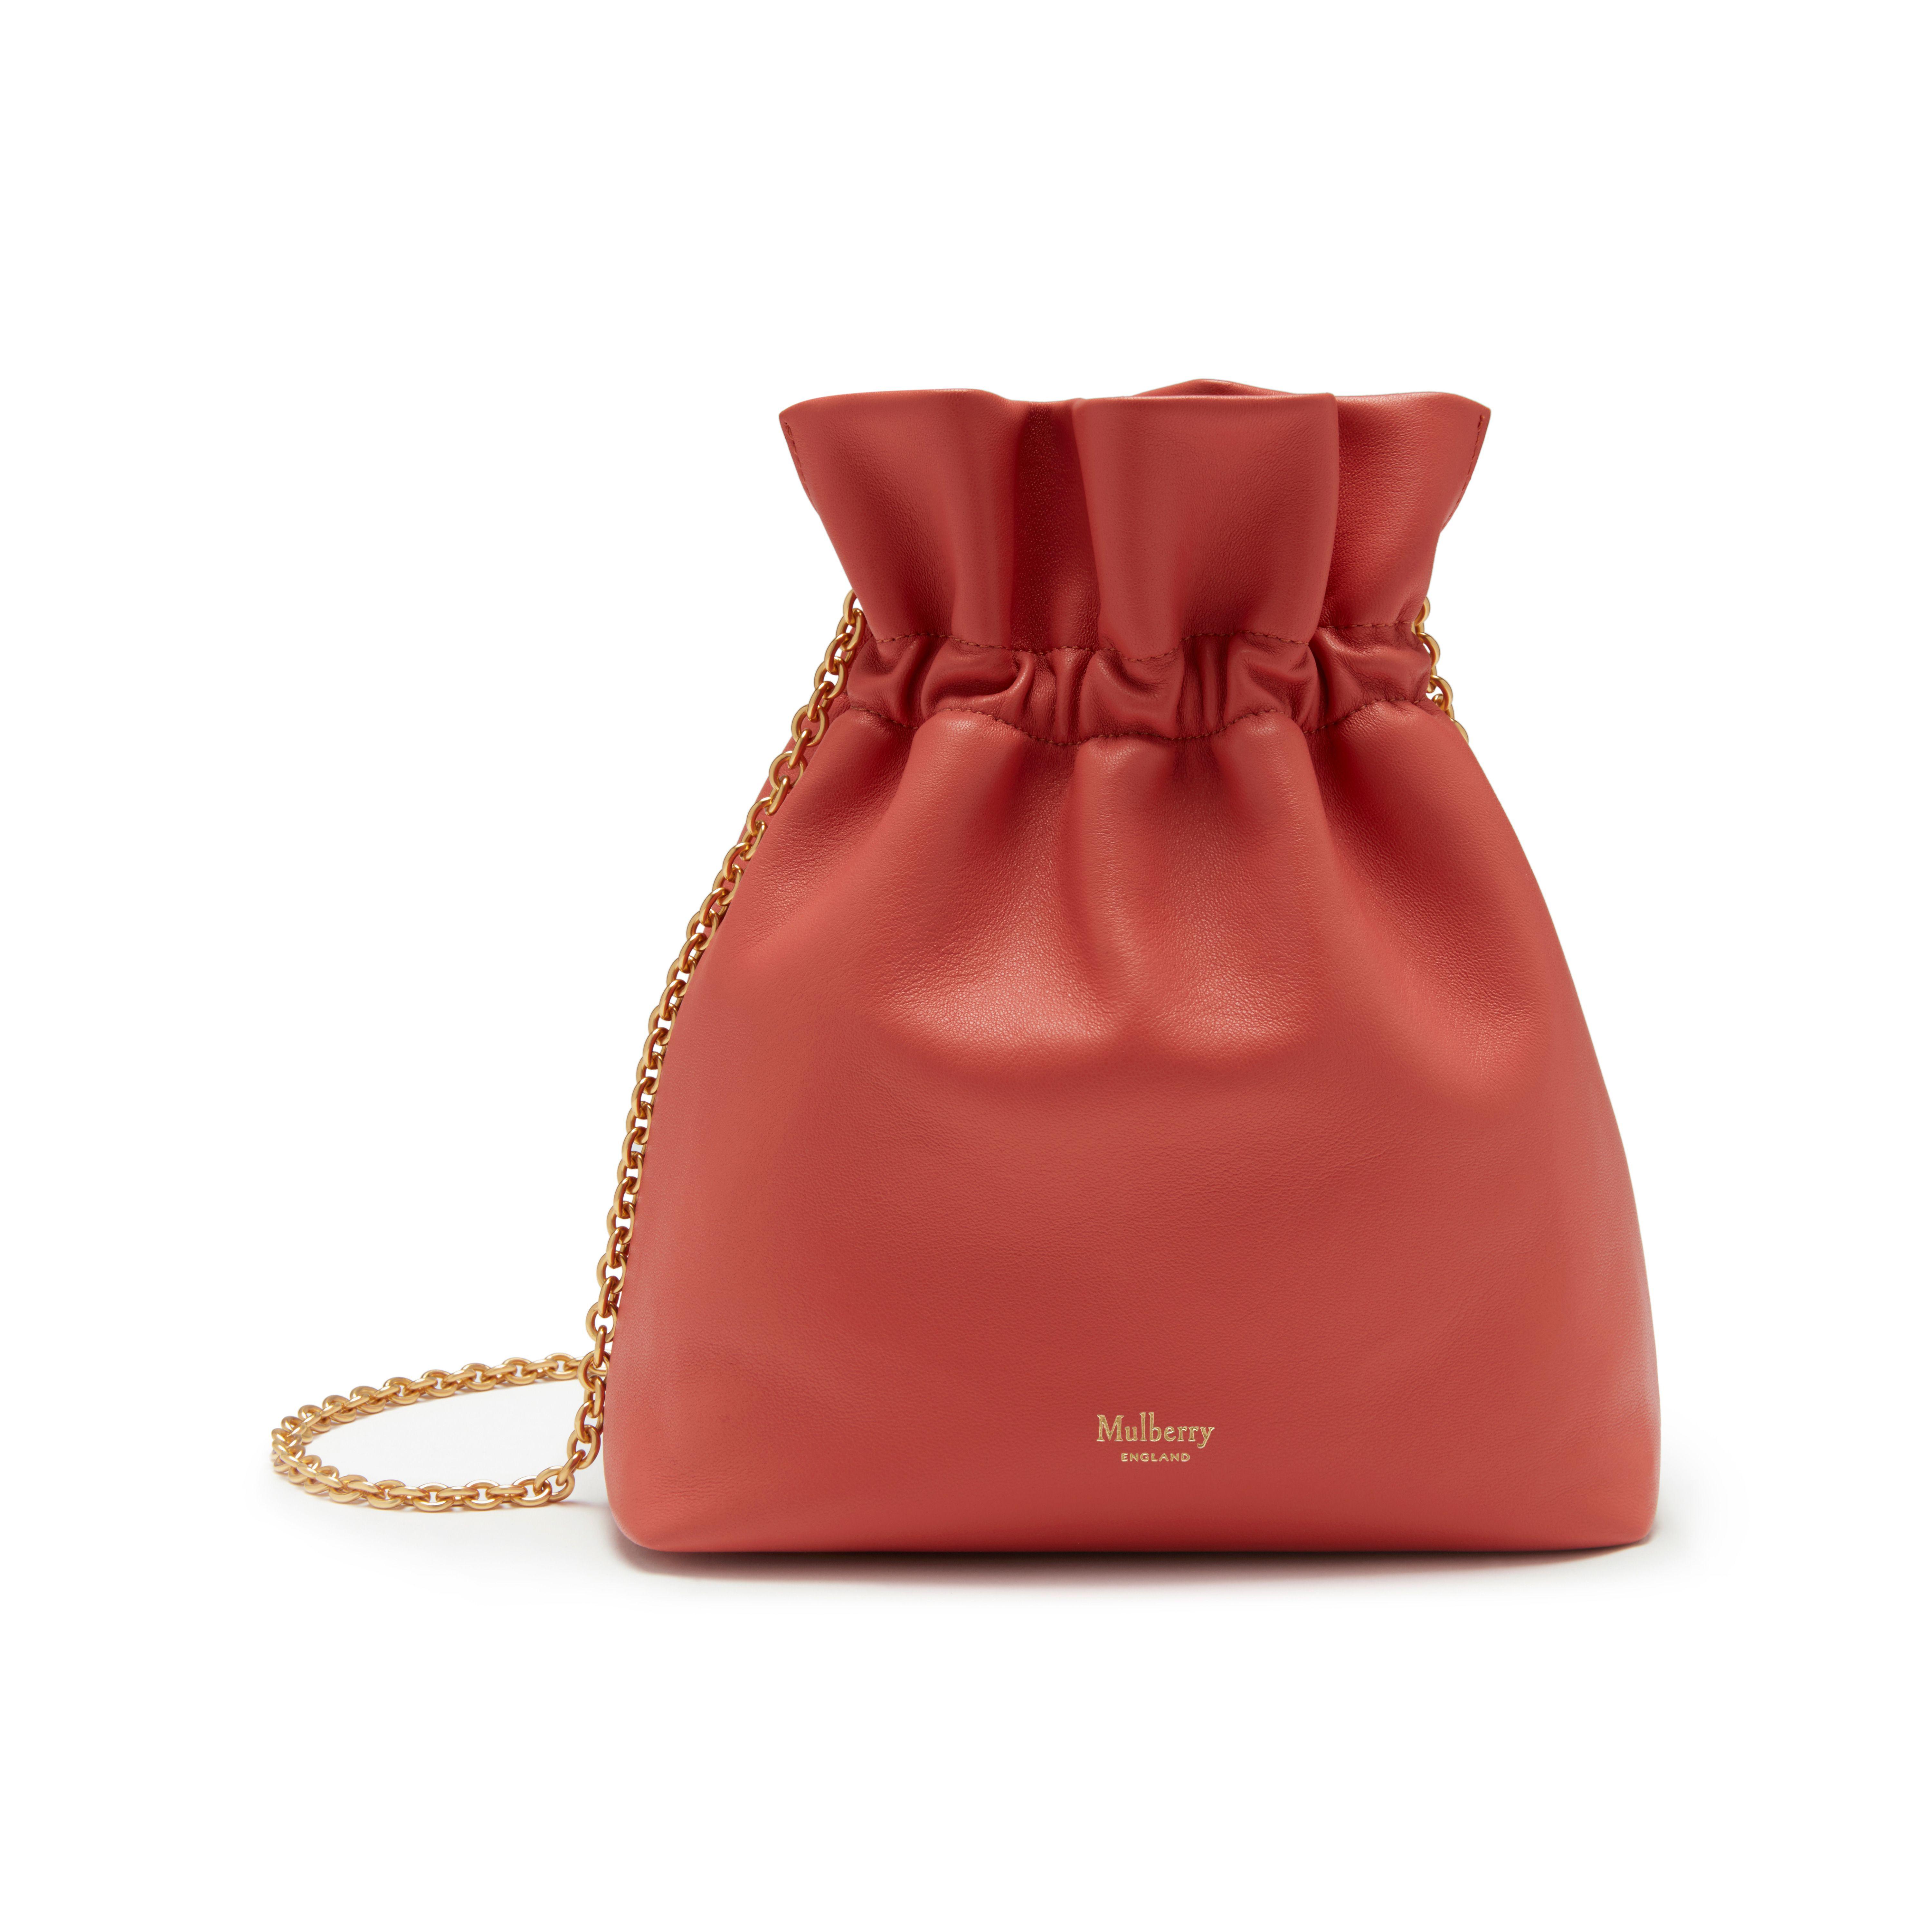 Mulberry Leather Lynton Mini Bucket in Coral (Red) - Lyst